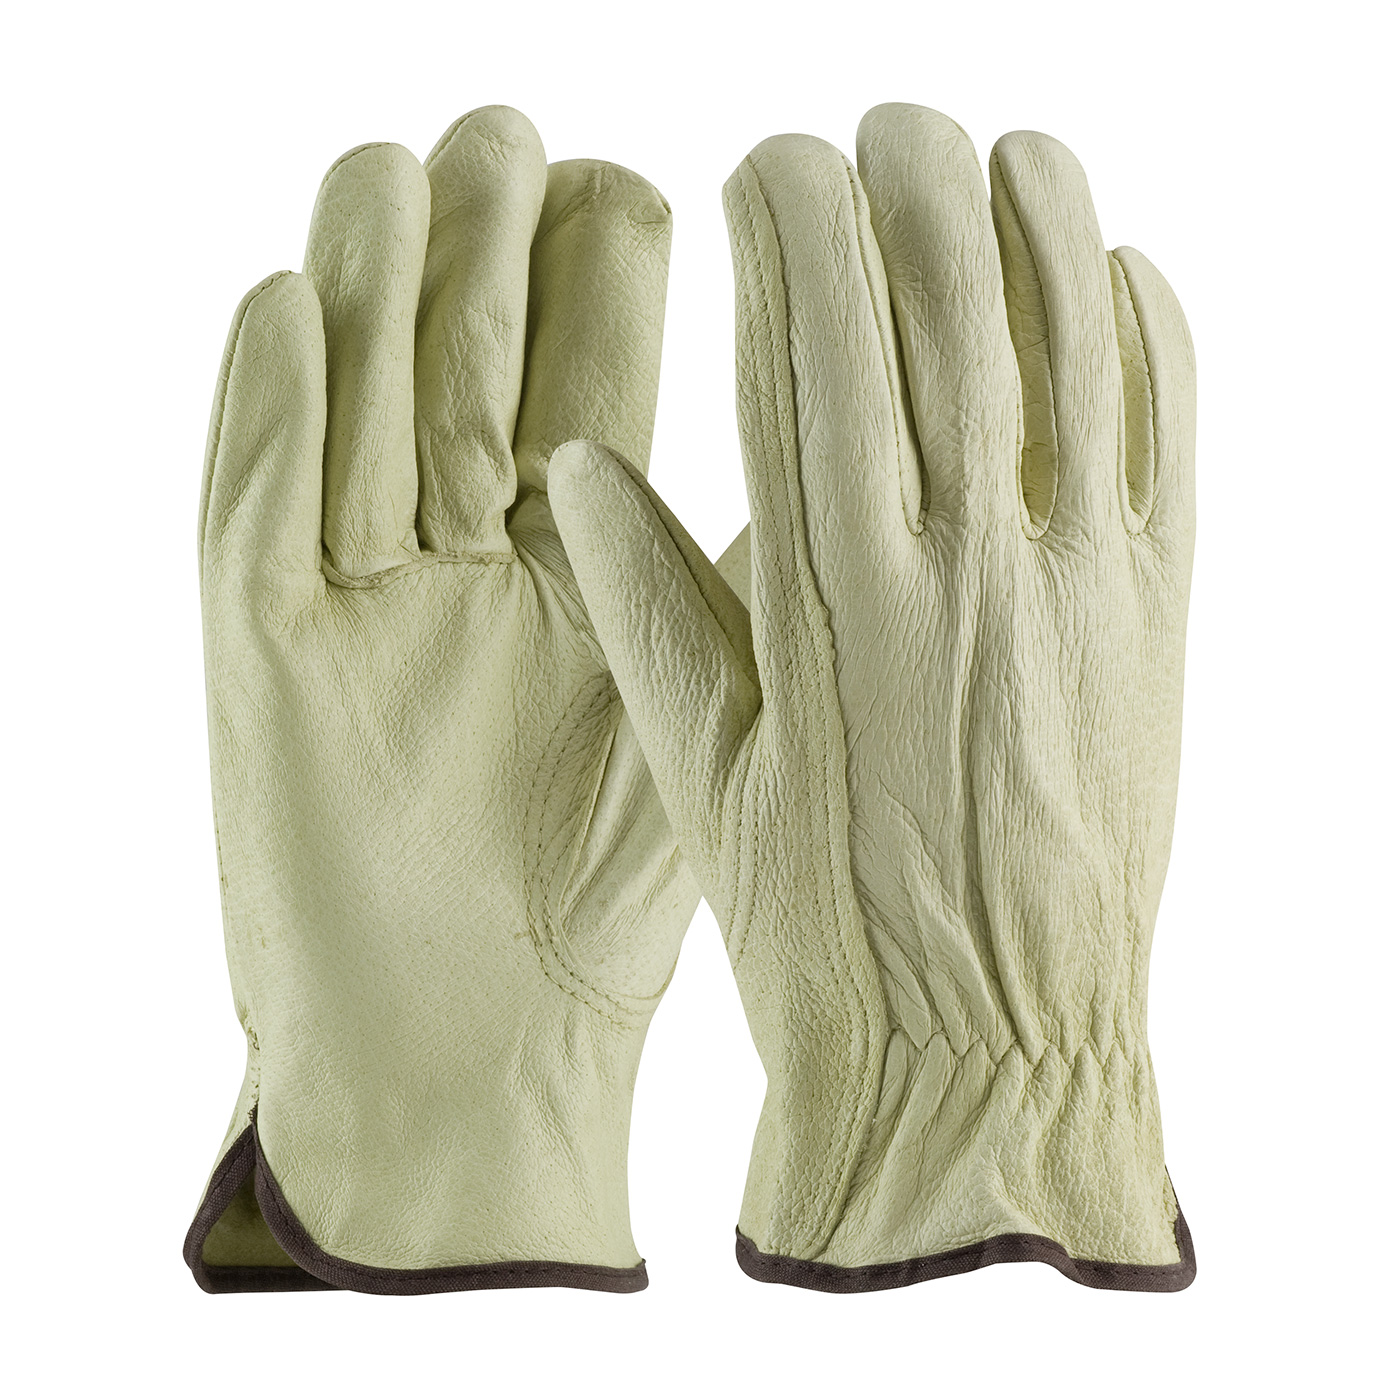 PIP 70-360/S Industry Grade Top Grain Pigskin Leather Drivers Glove - Keystone Thumb - Small PID-70-360 S